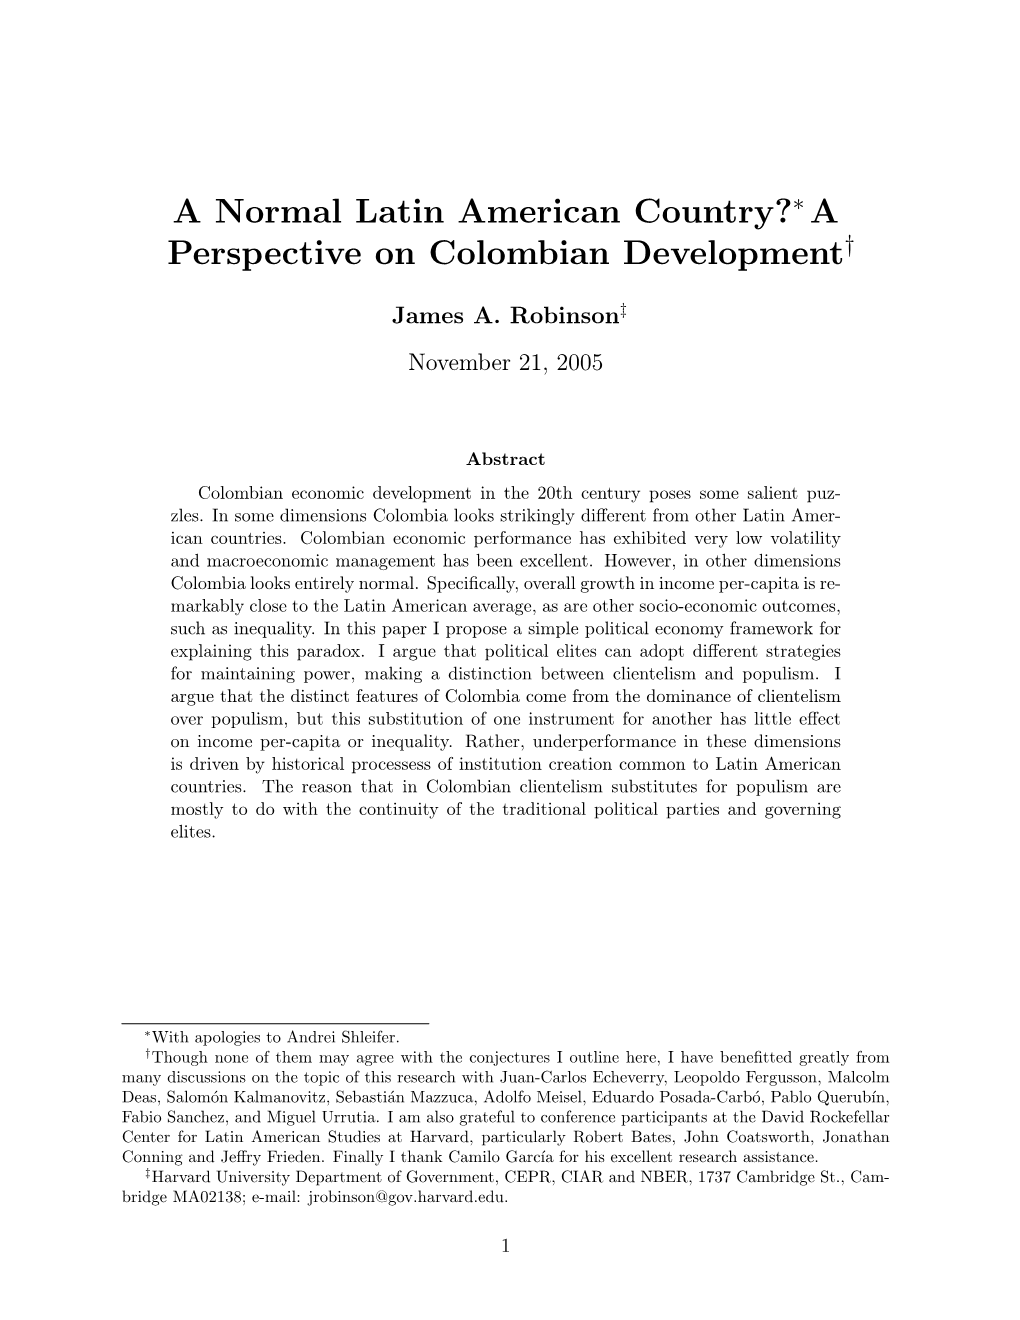 A Normal Latin American Country? a Perspective on Colombian